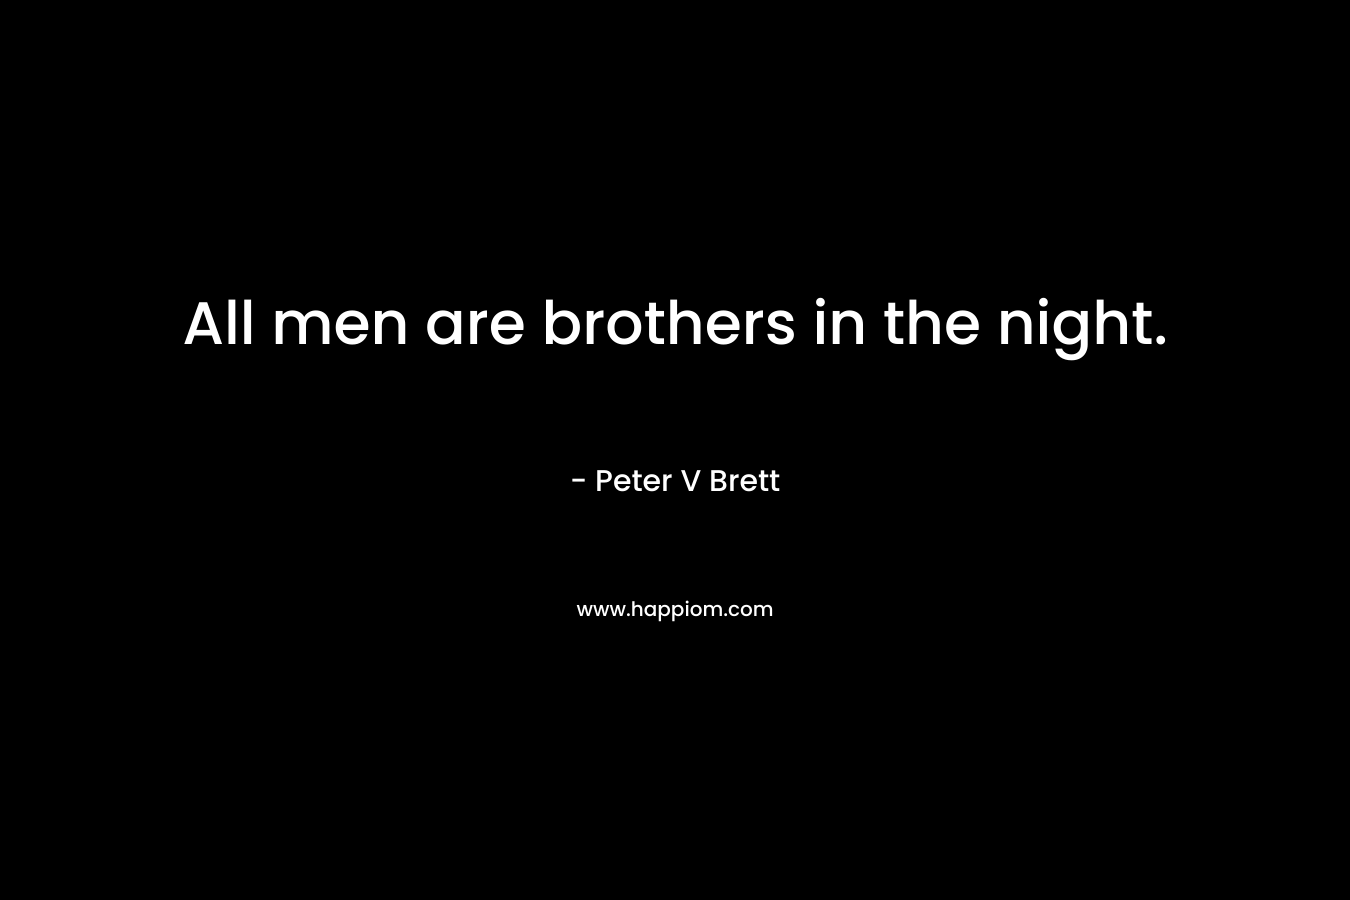 All men are brothers in the night. – Peter V Brett